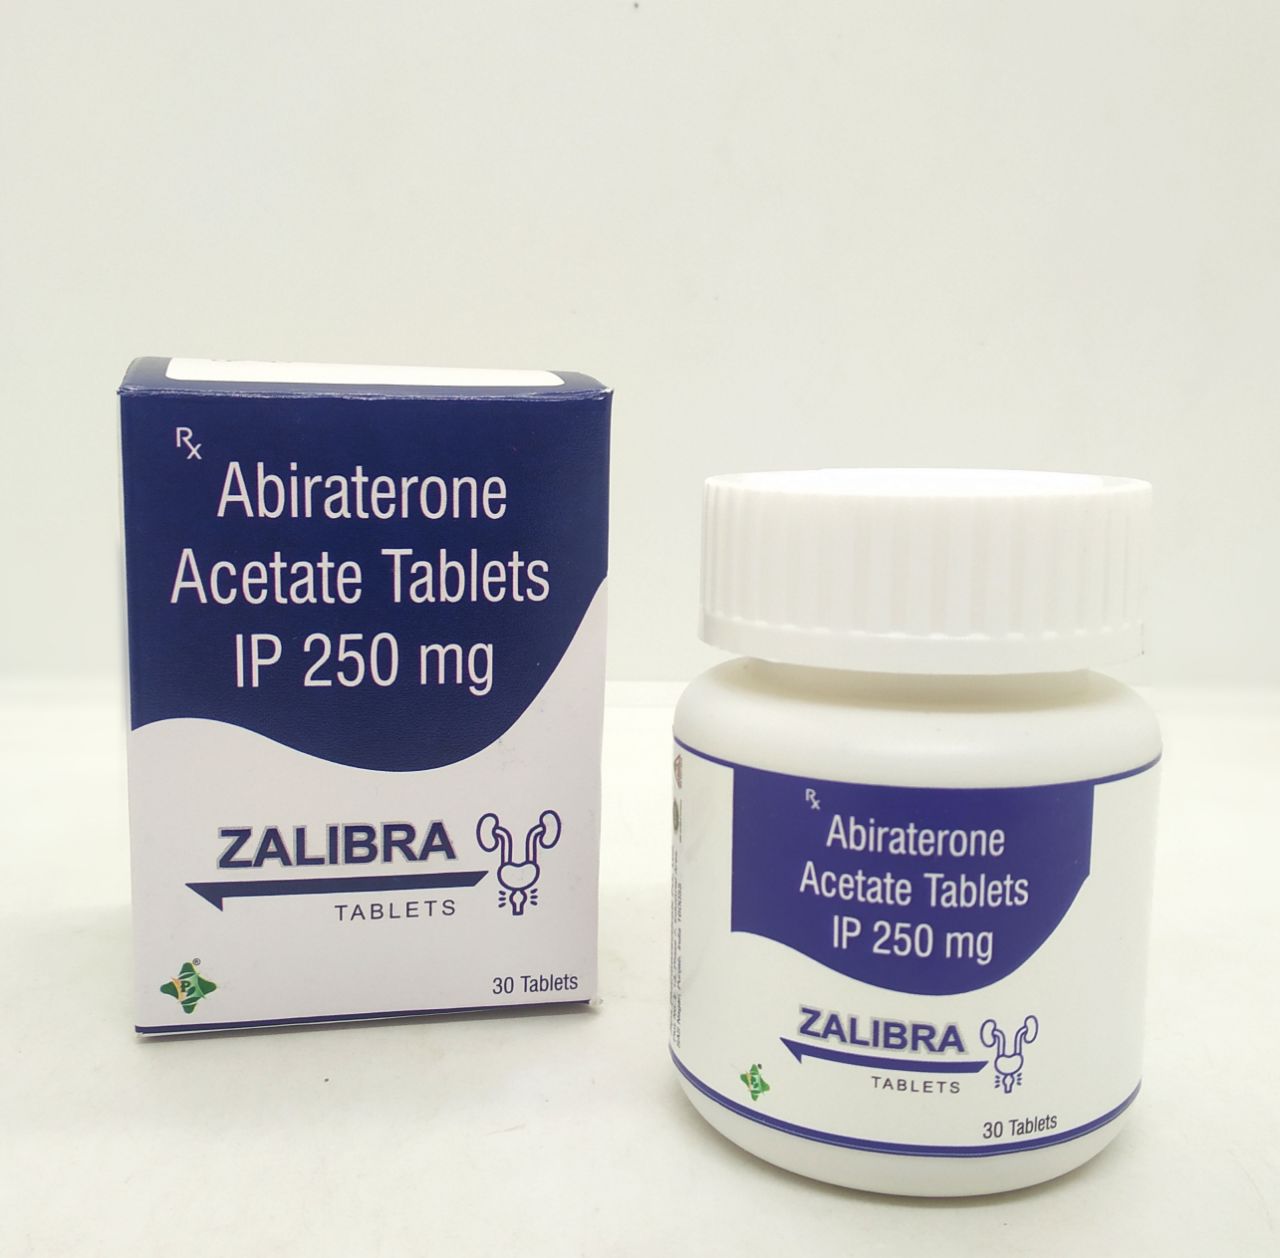 Abiraterone Acetate Tablets IP 250 mg